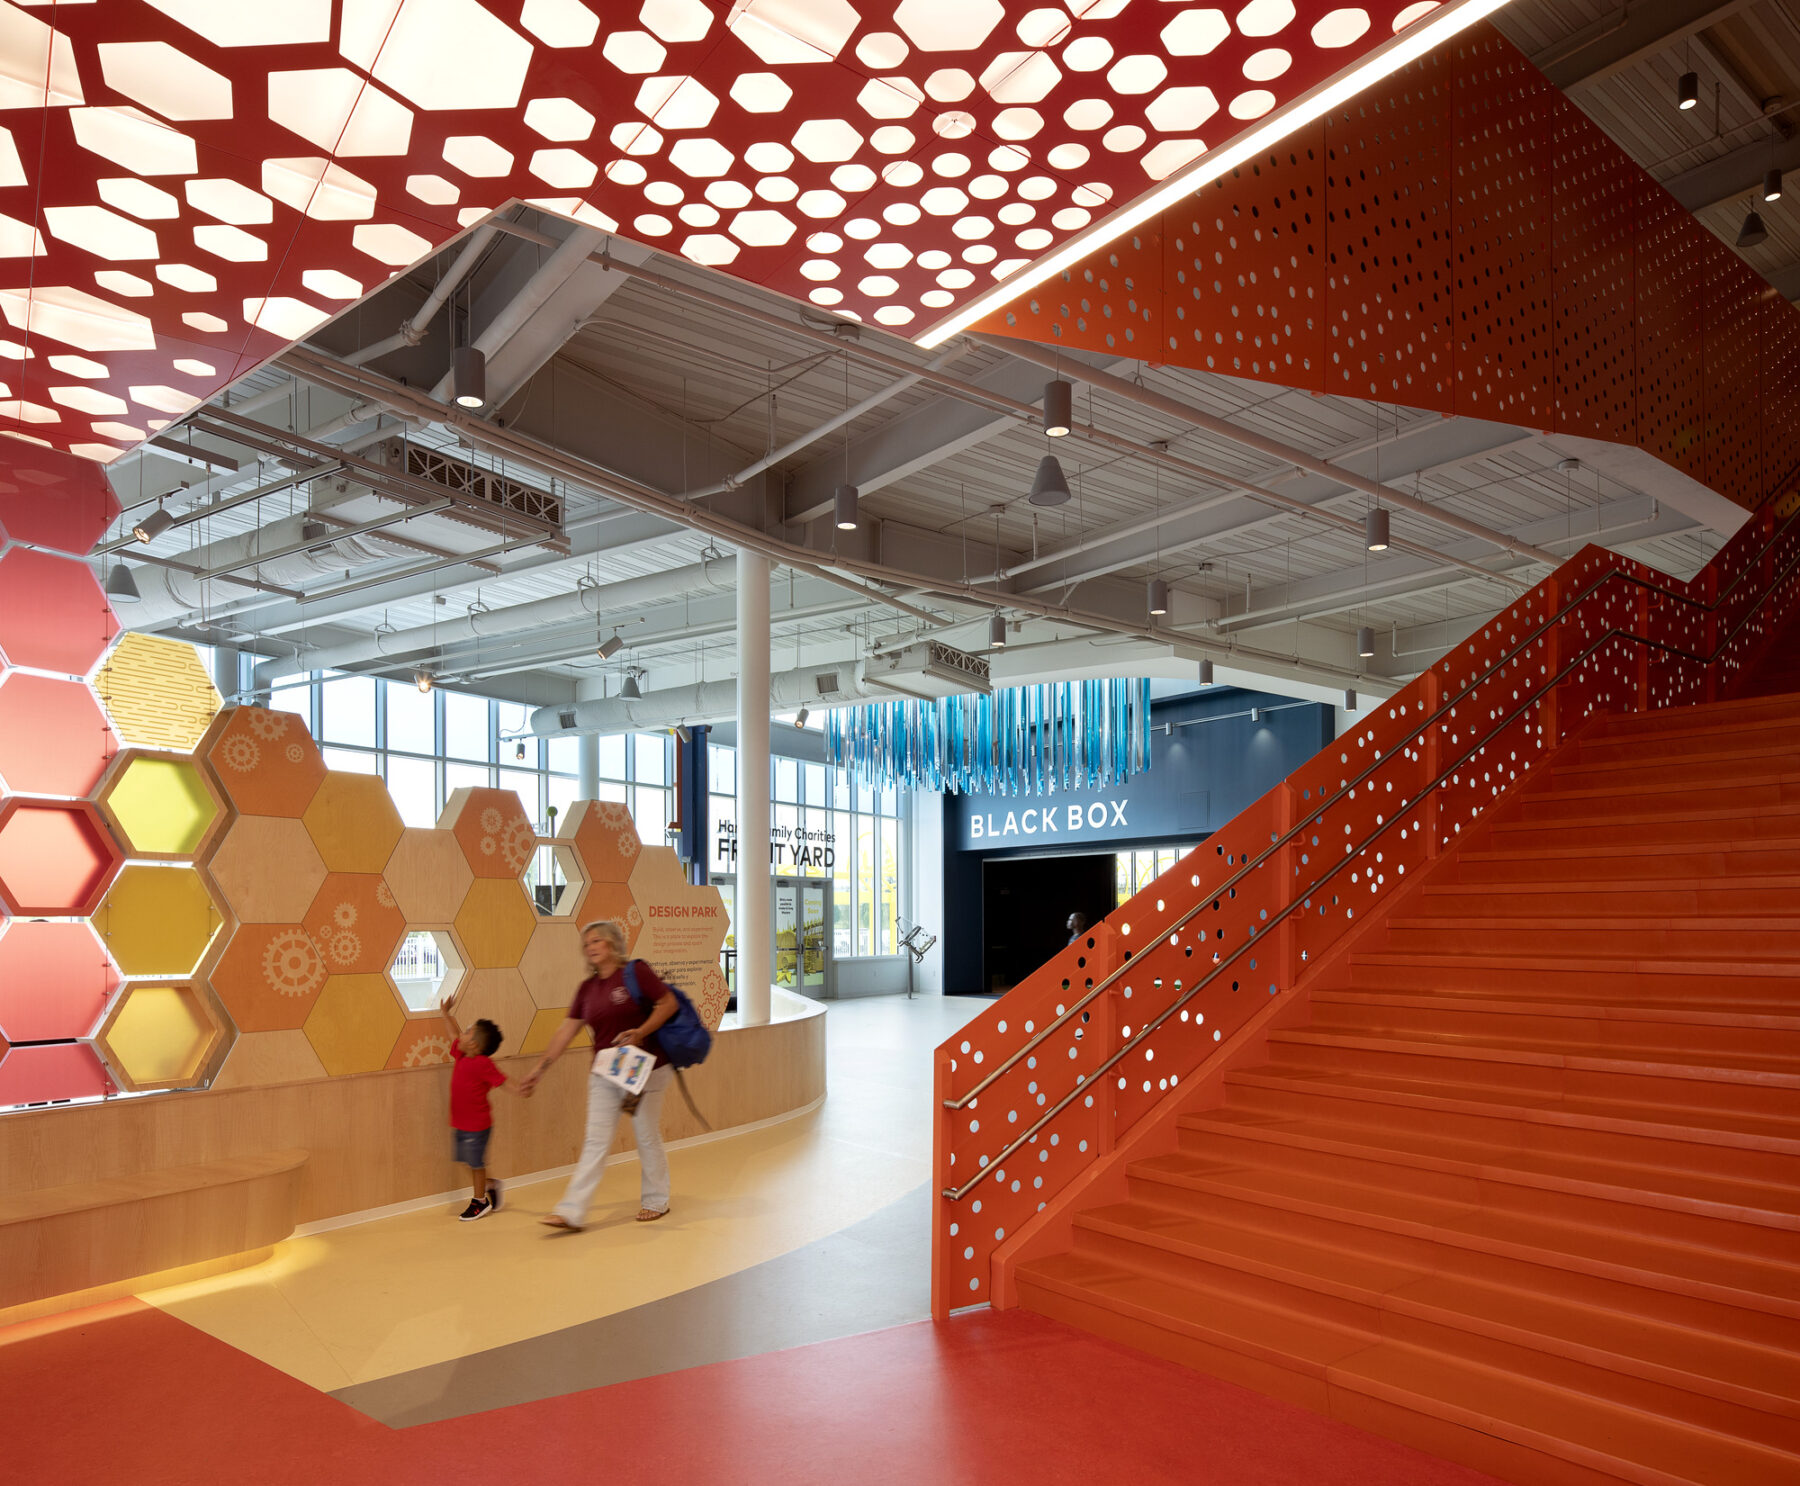 Interior lobby of Children's Museum including bright red staircase and a perforated illuminated ceiling